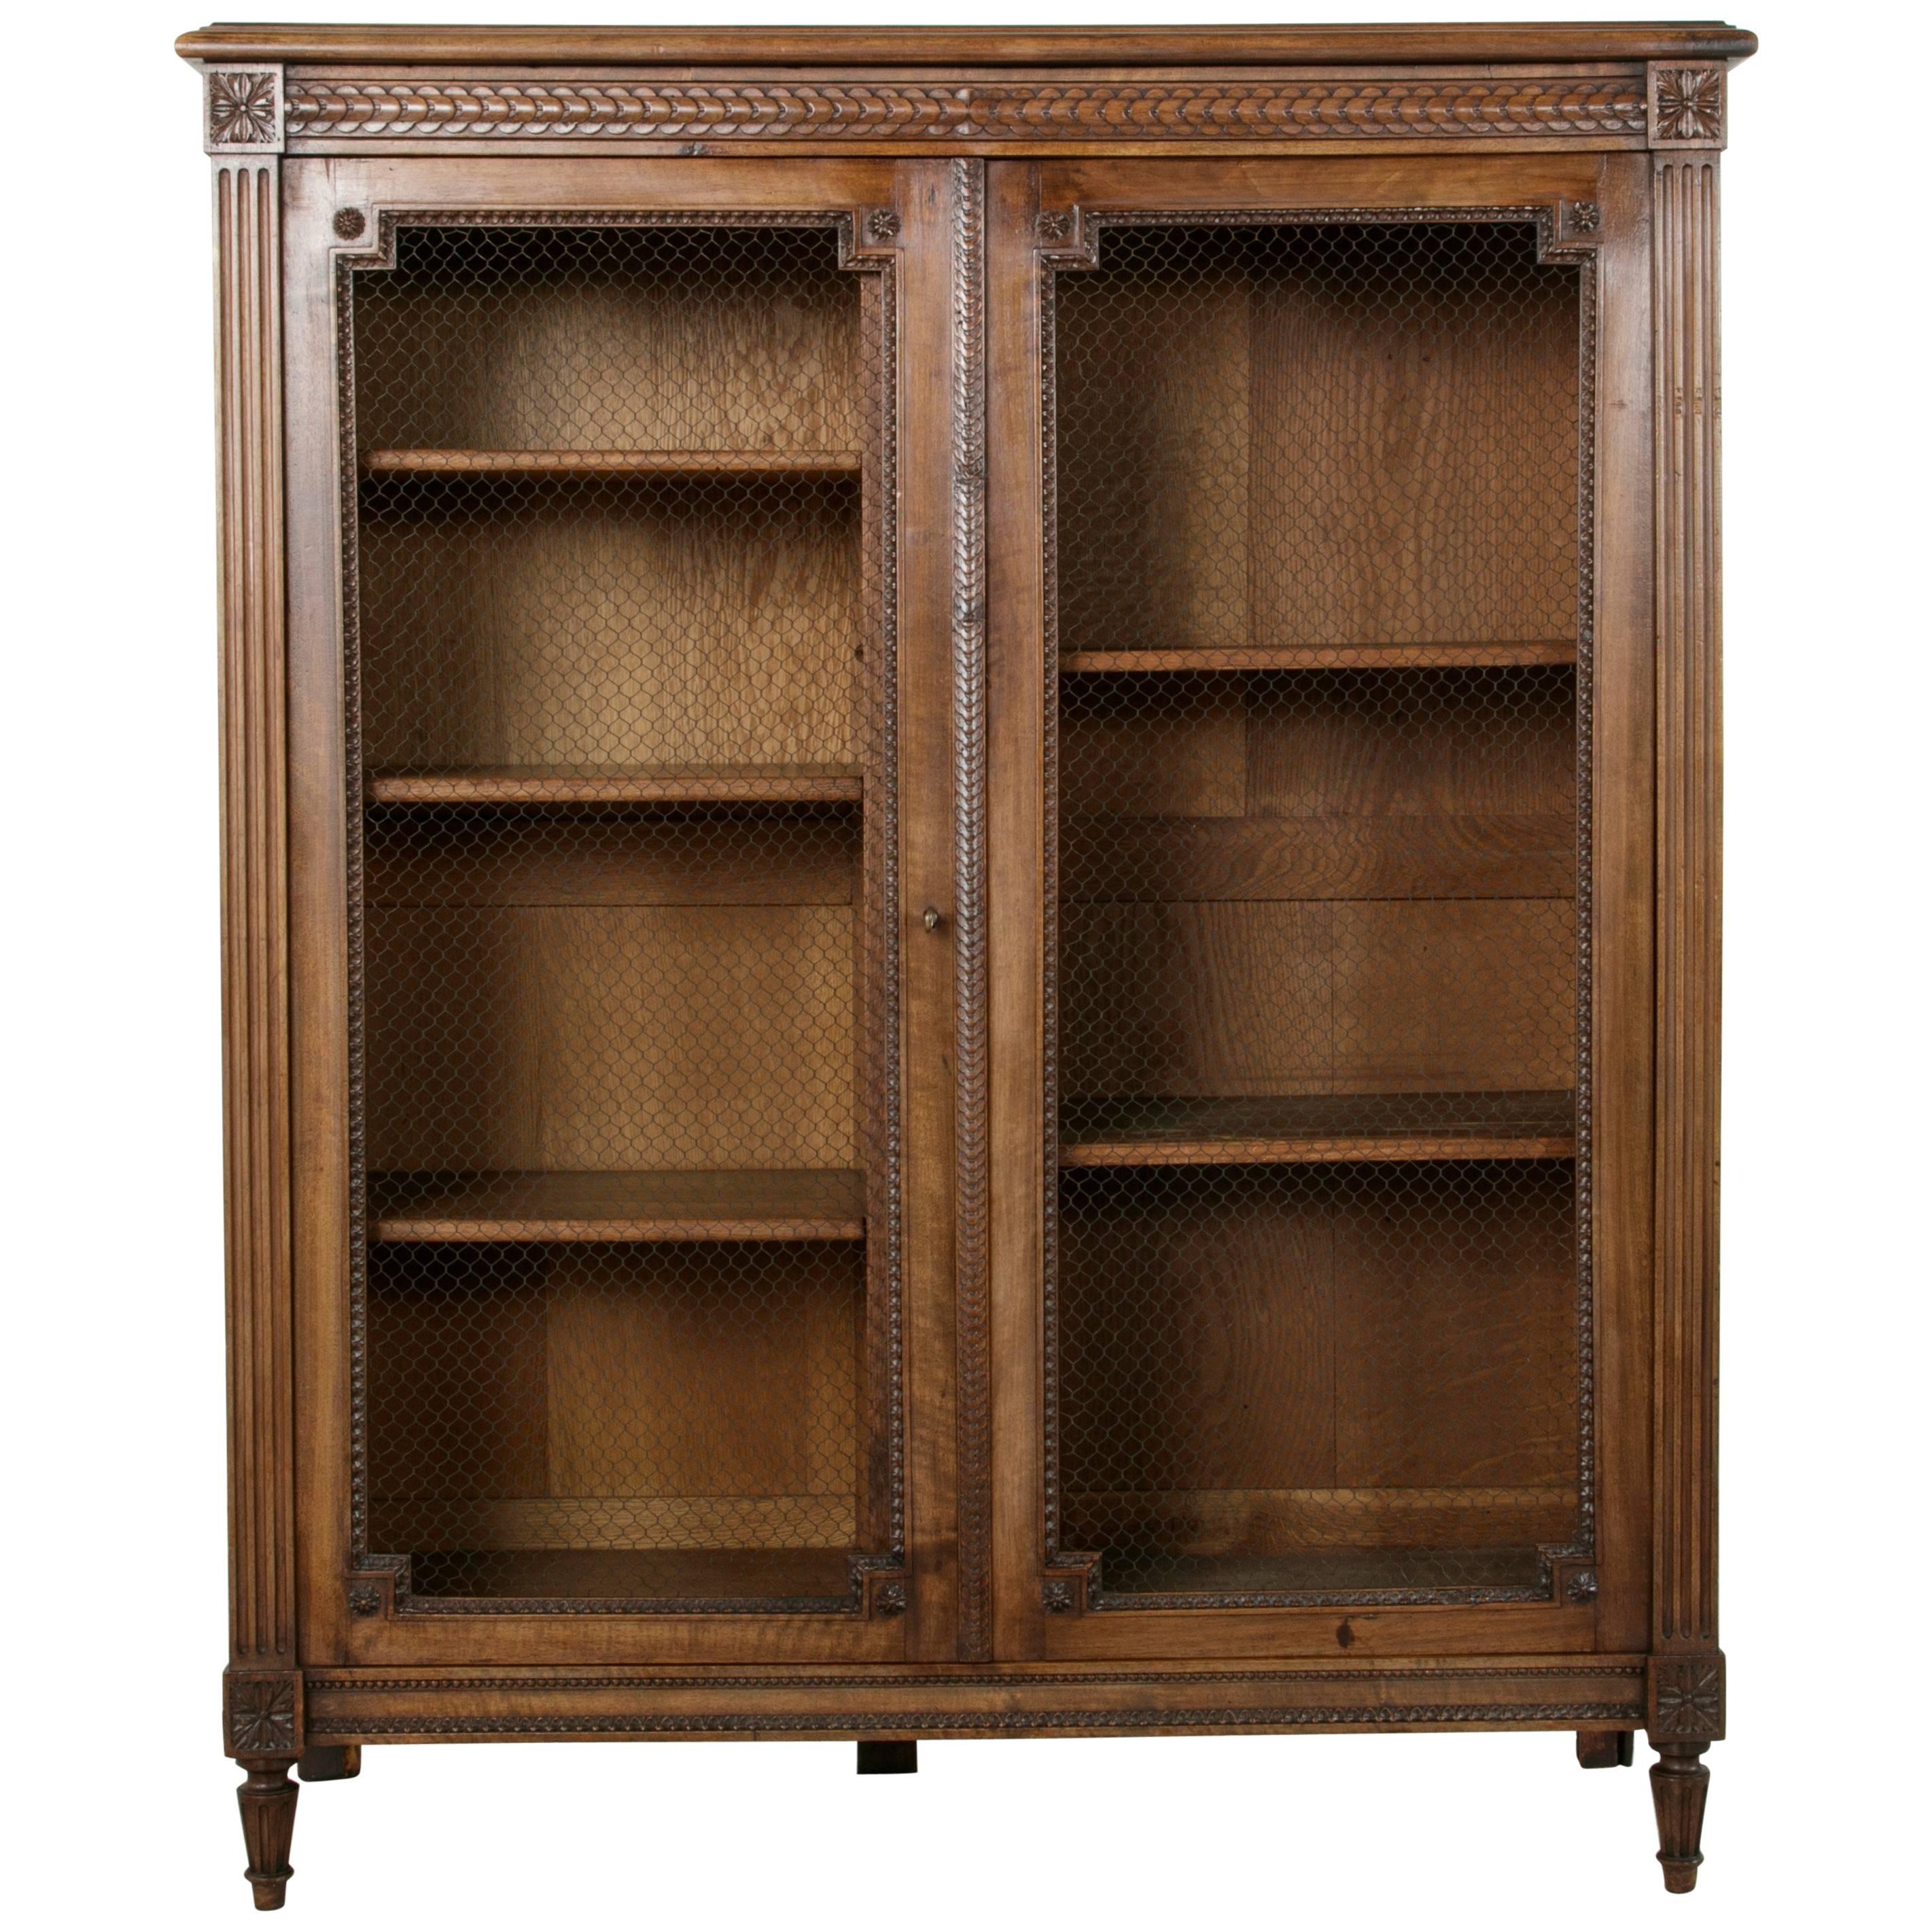 Late 19th Century Louis XVI Style Hand-Carved Walnut Bibliotheque or Bookcase